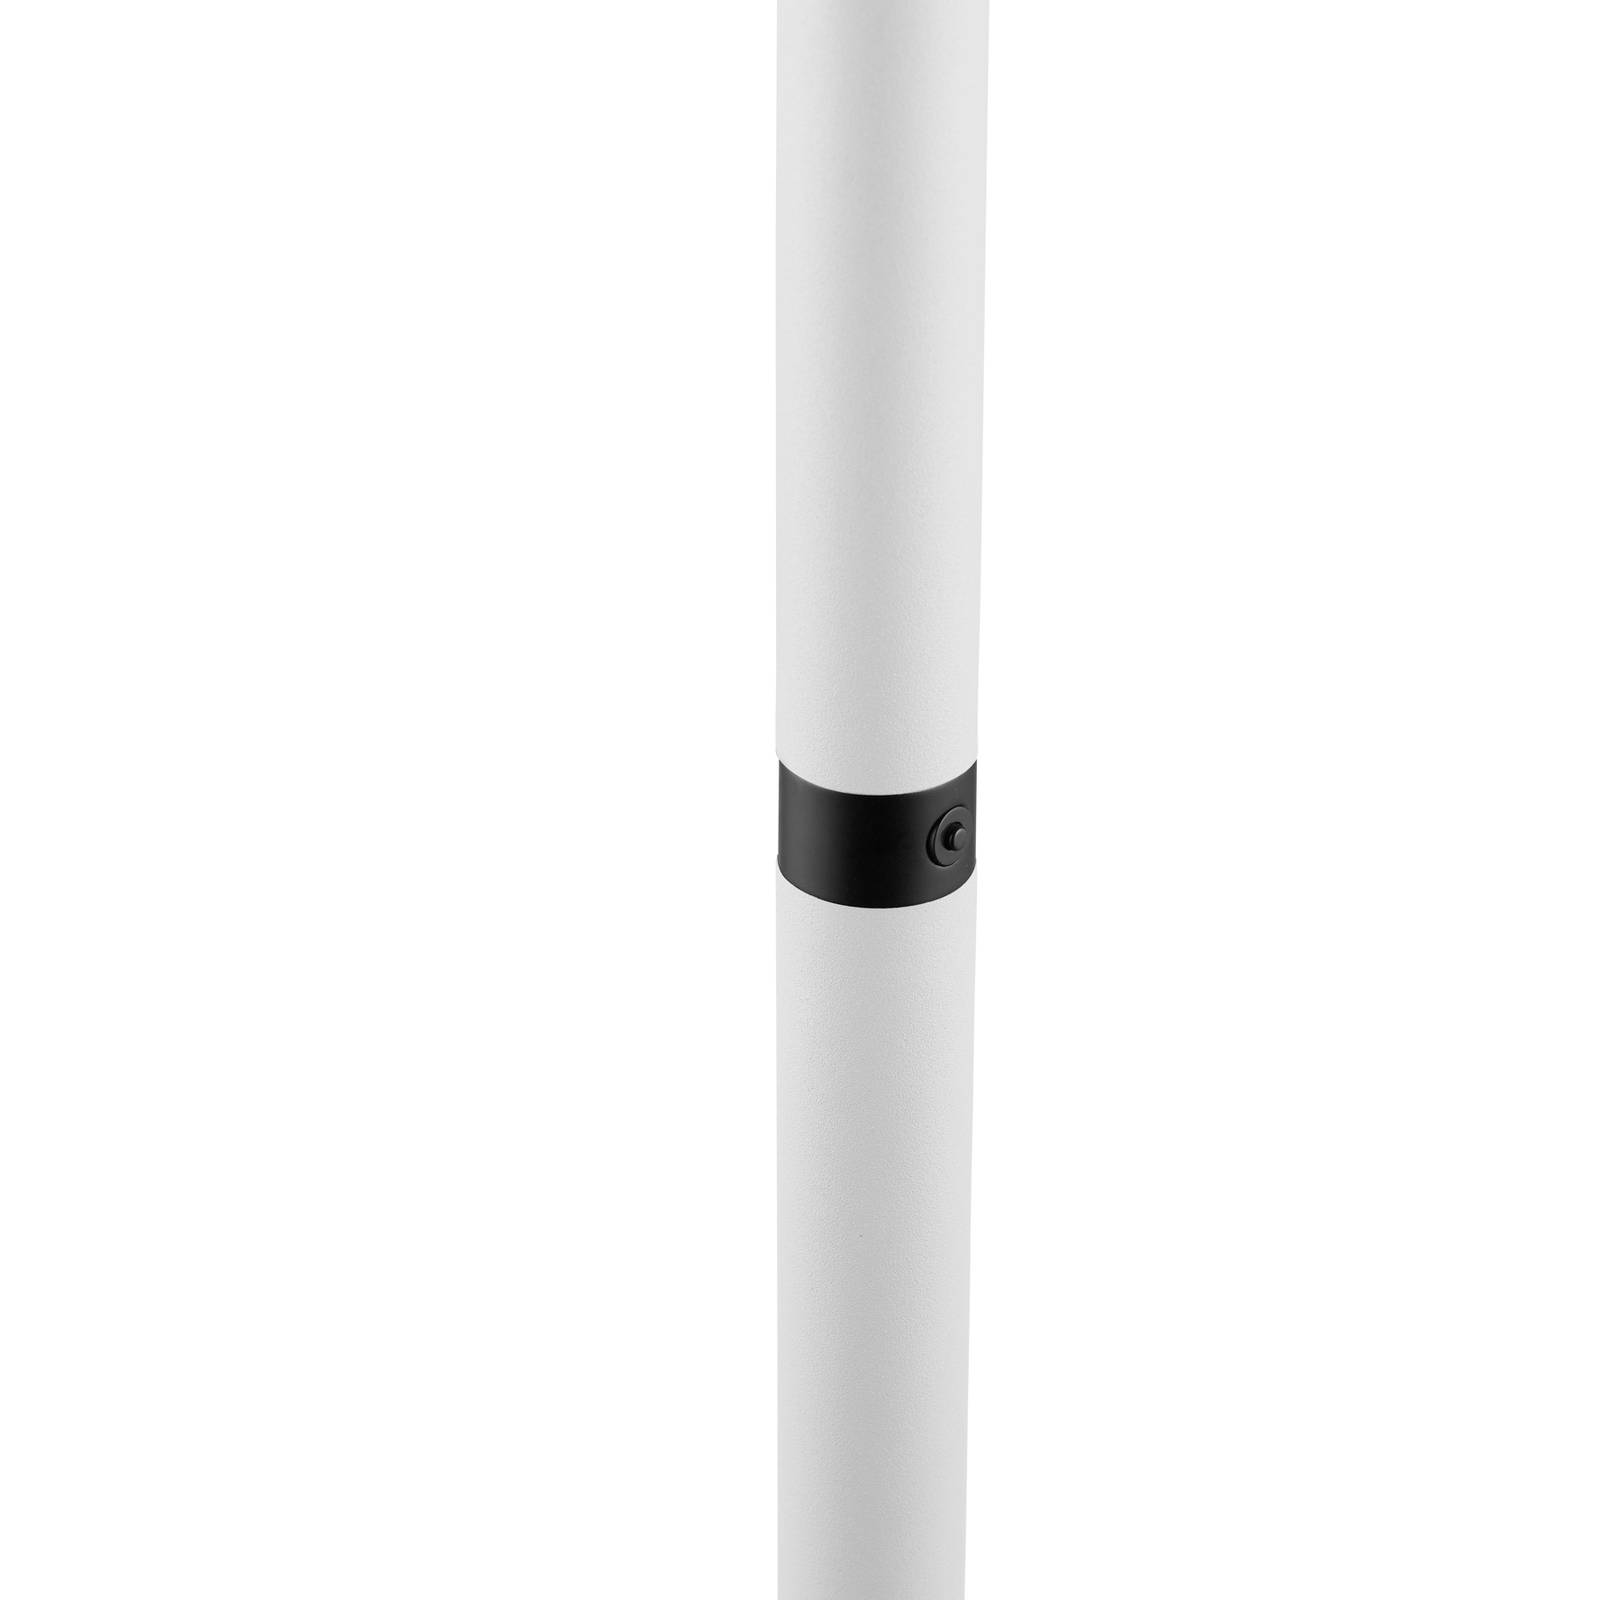 Image of HELL Lampadaire LED Evolo CCT, blanc 4045542233536